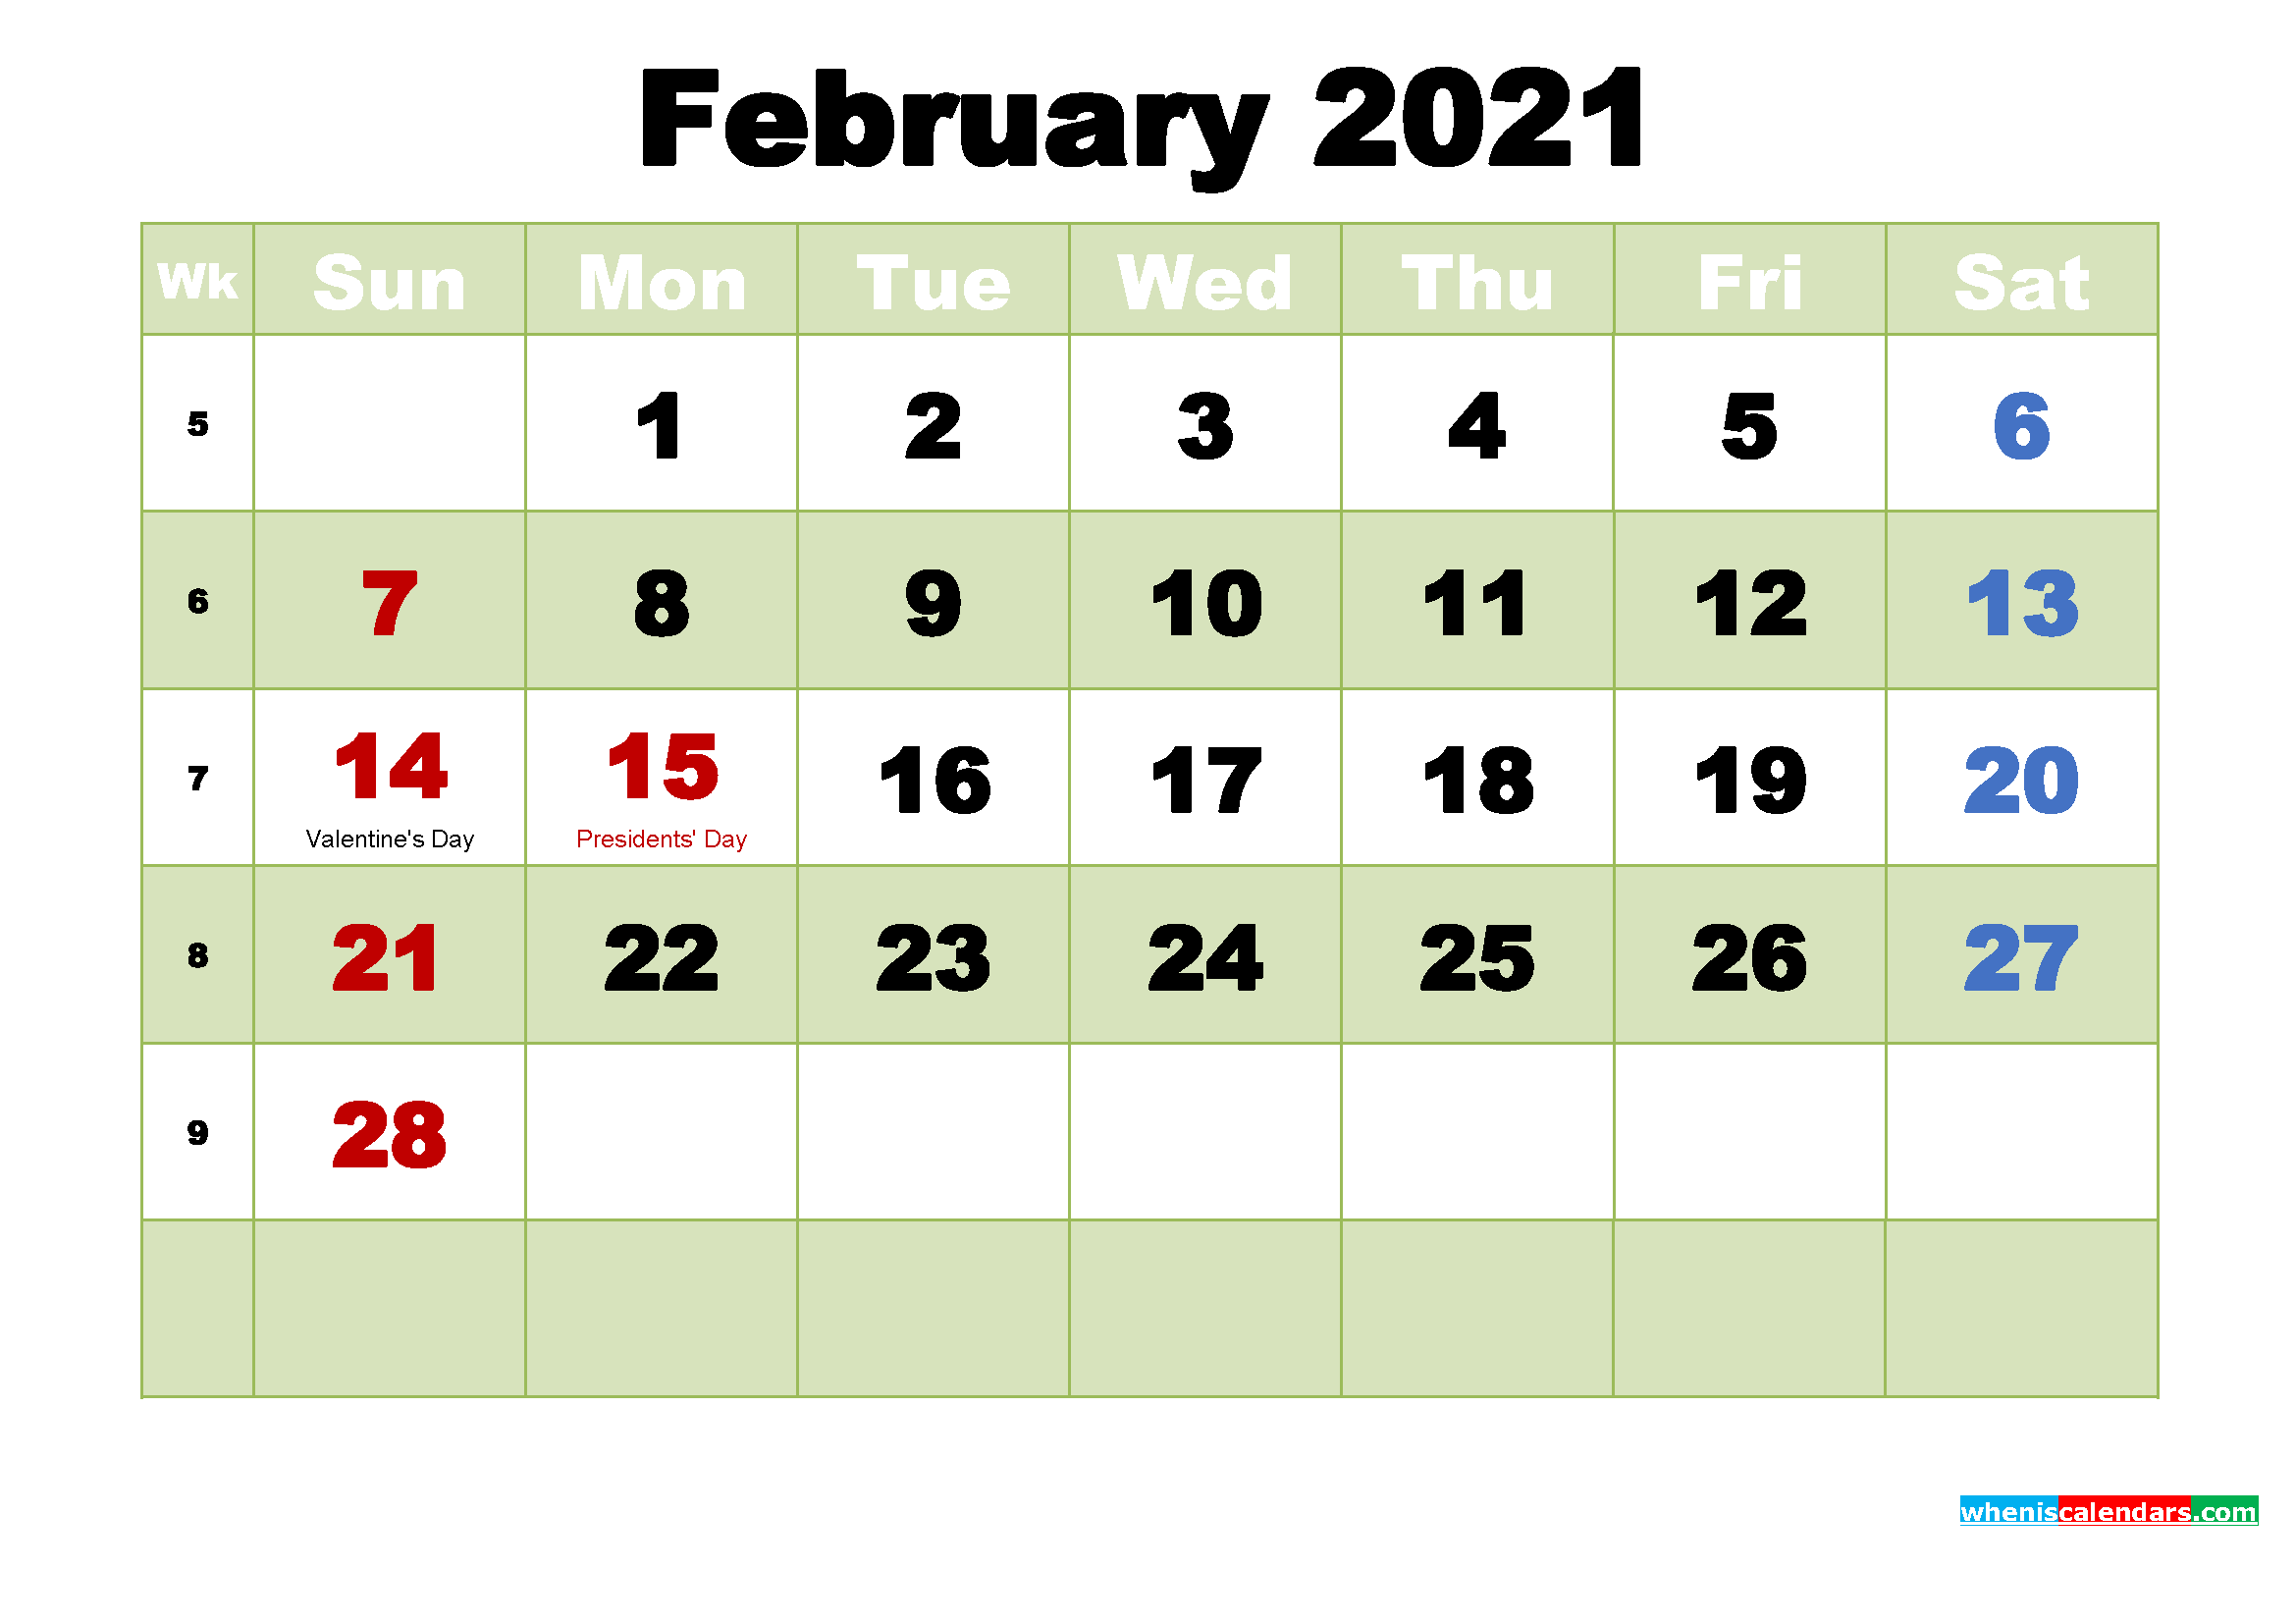 February 2021 Calendar Wallpapers Top Free February 2021 Calendar Backgrounds Wallpaperaccess Find & download free graphic resources for calendar icon. february 2021 calendar wallpapers top